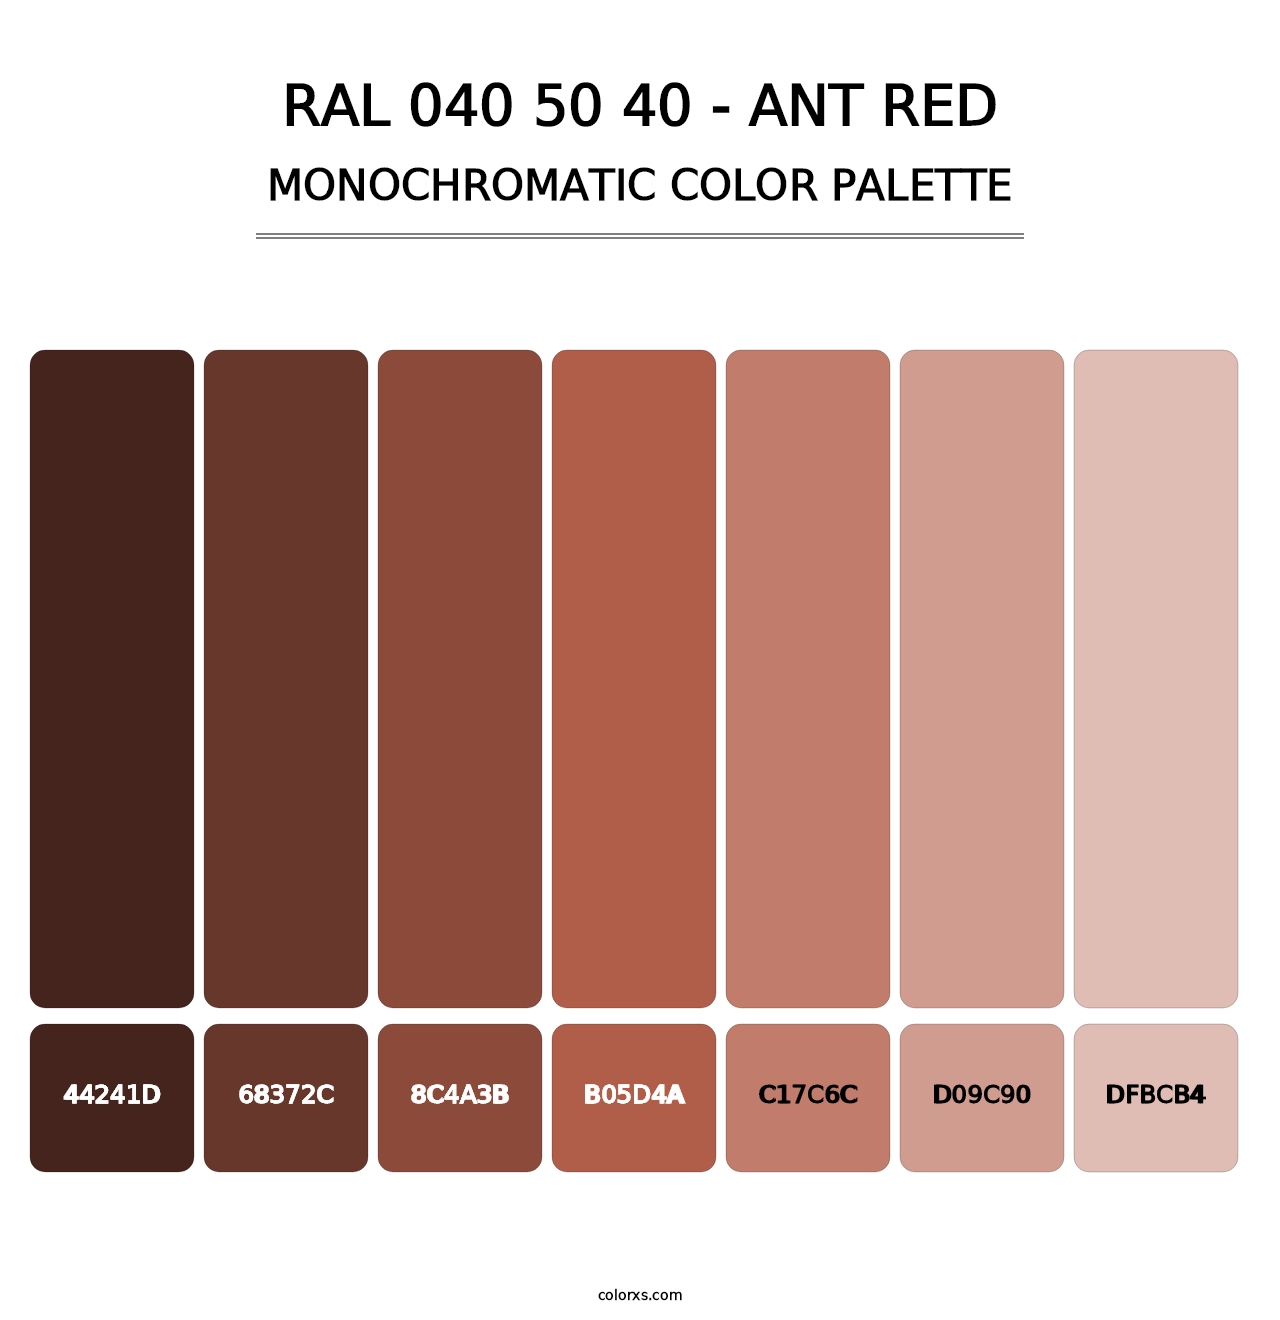 RAL 040 50 40 - Ant Red - Monochromatic Color Palette